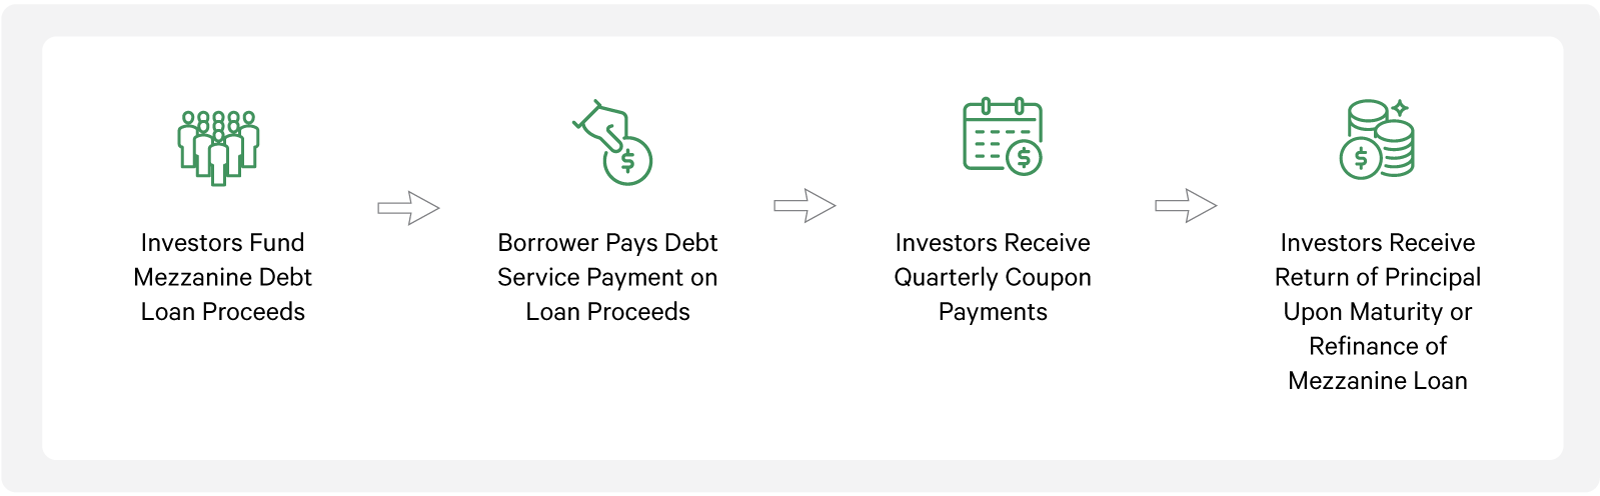 Mezzanine Debt Investments produce a fixed income when the borrower makes regular loan payments and it is paid through to the investor in a coupon